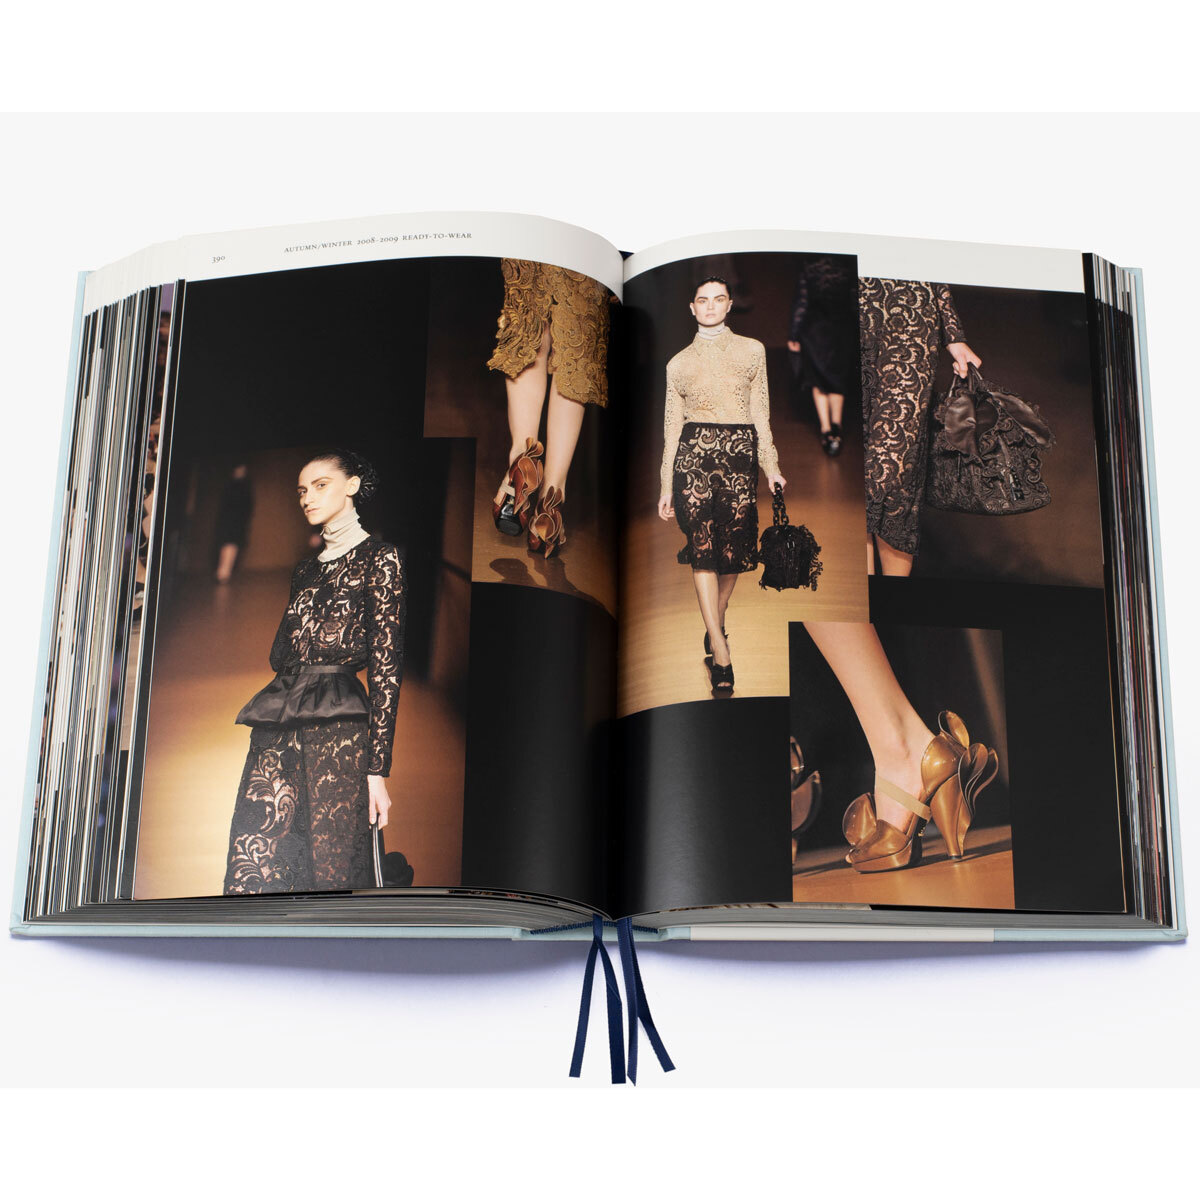 Prada - The Complete Collections (Catwalk) Book - Trenzseater